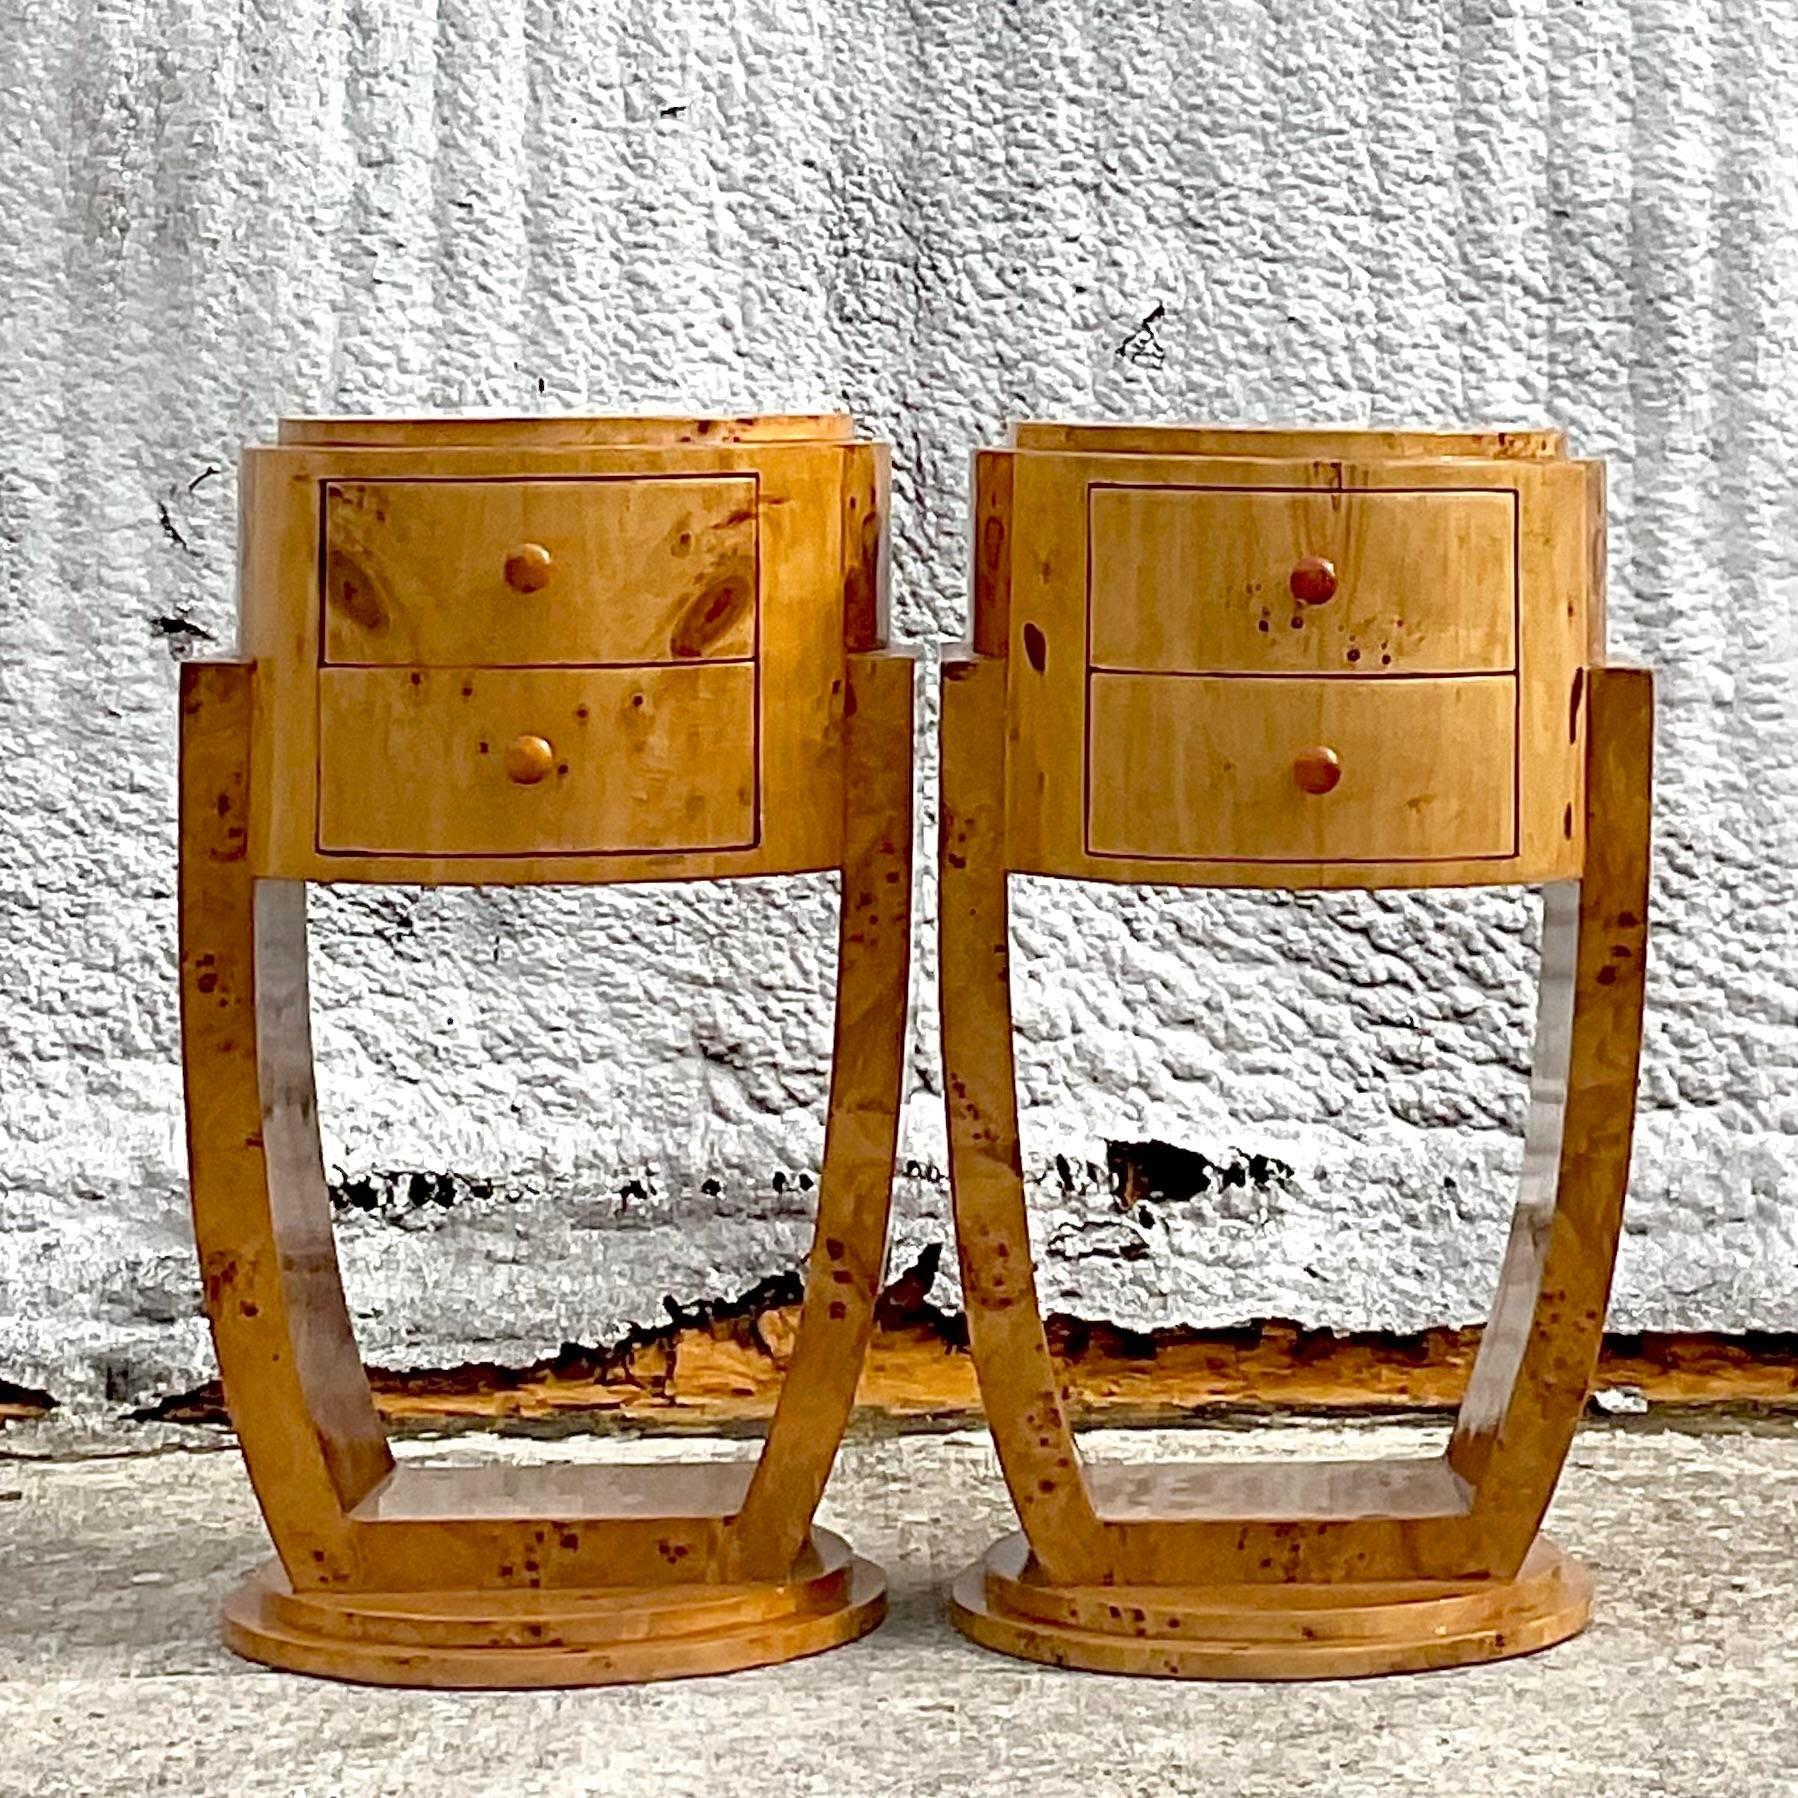 A fantastic pair of vintage Deco nightstands. A chic Burl wood construction in a glass lacquered finish. Gorgeous Bakelite pulls. Acquired from a Palm Beach estate. 